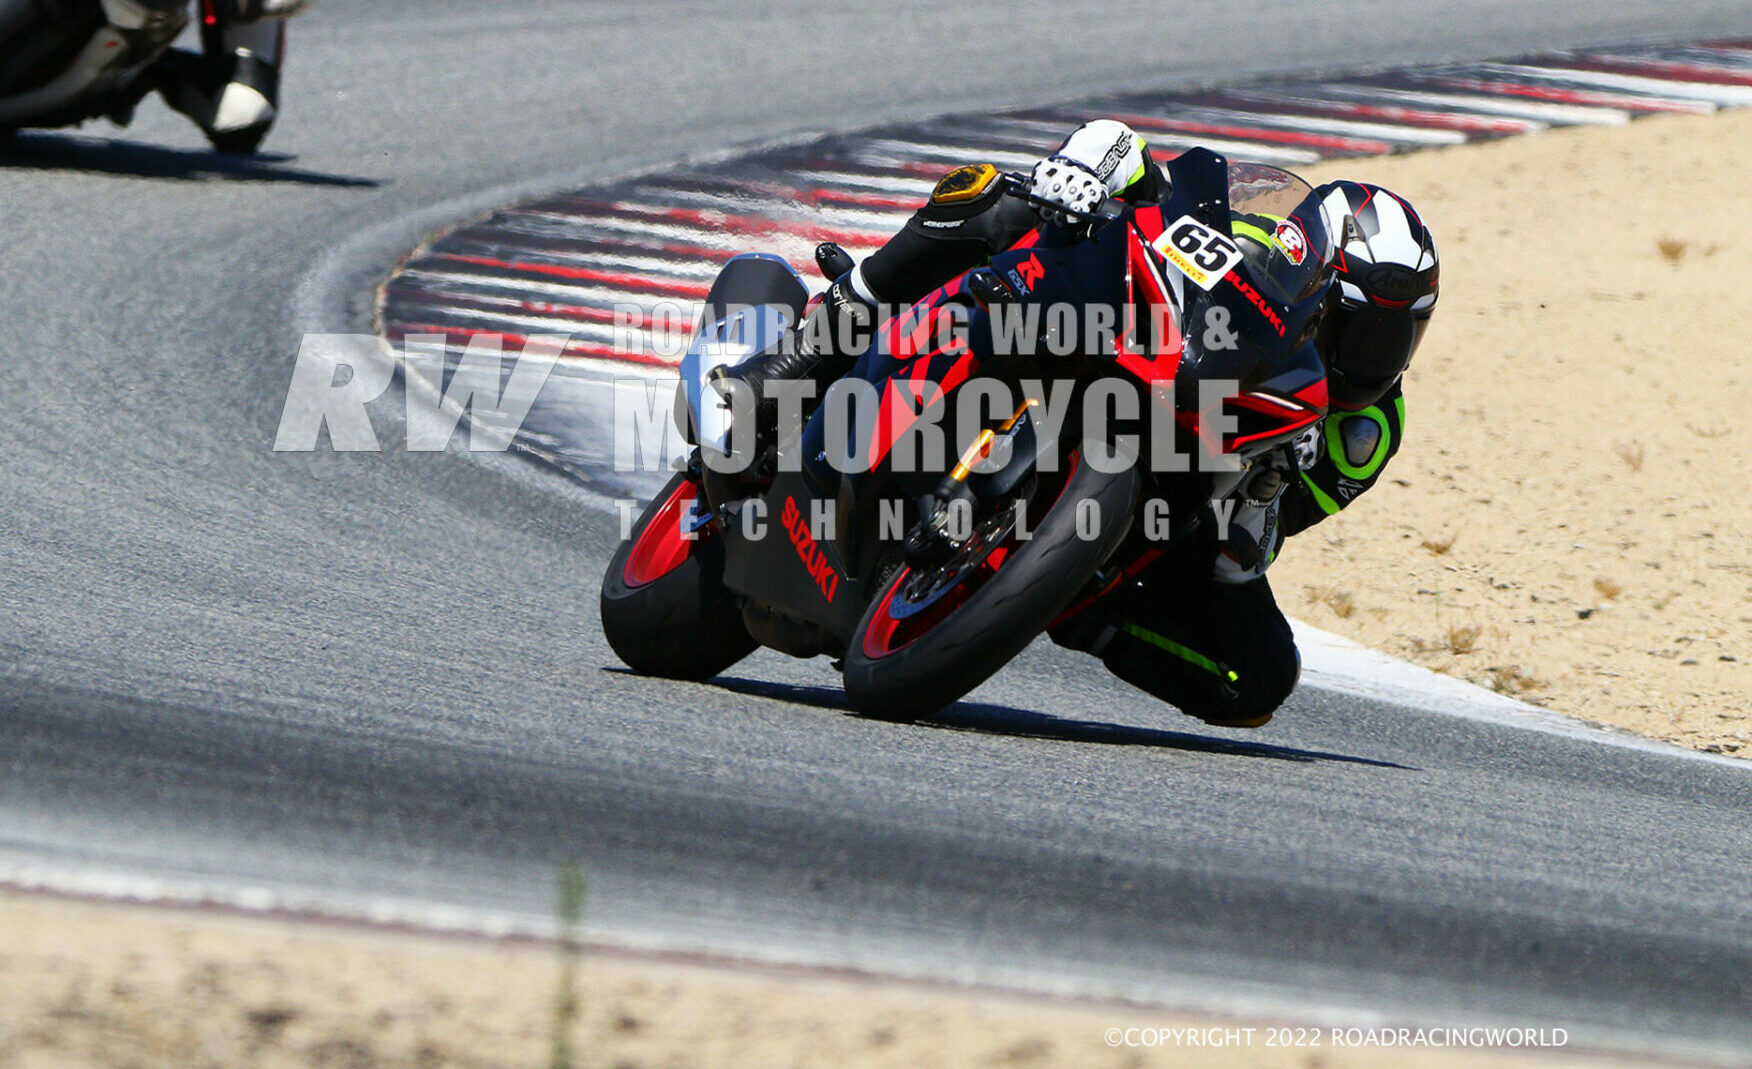 The Suzuki GSX-R1000R is easy to hustle around Laguna at a track day pace and relatively comfortable on a long day of highway riding. Photos by Caliphotography.com.